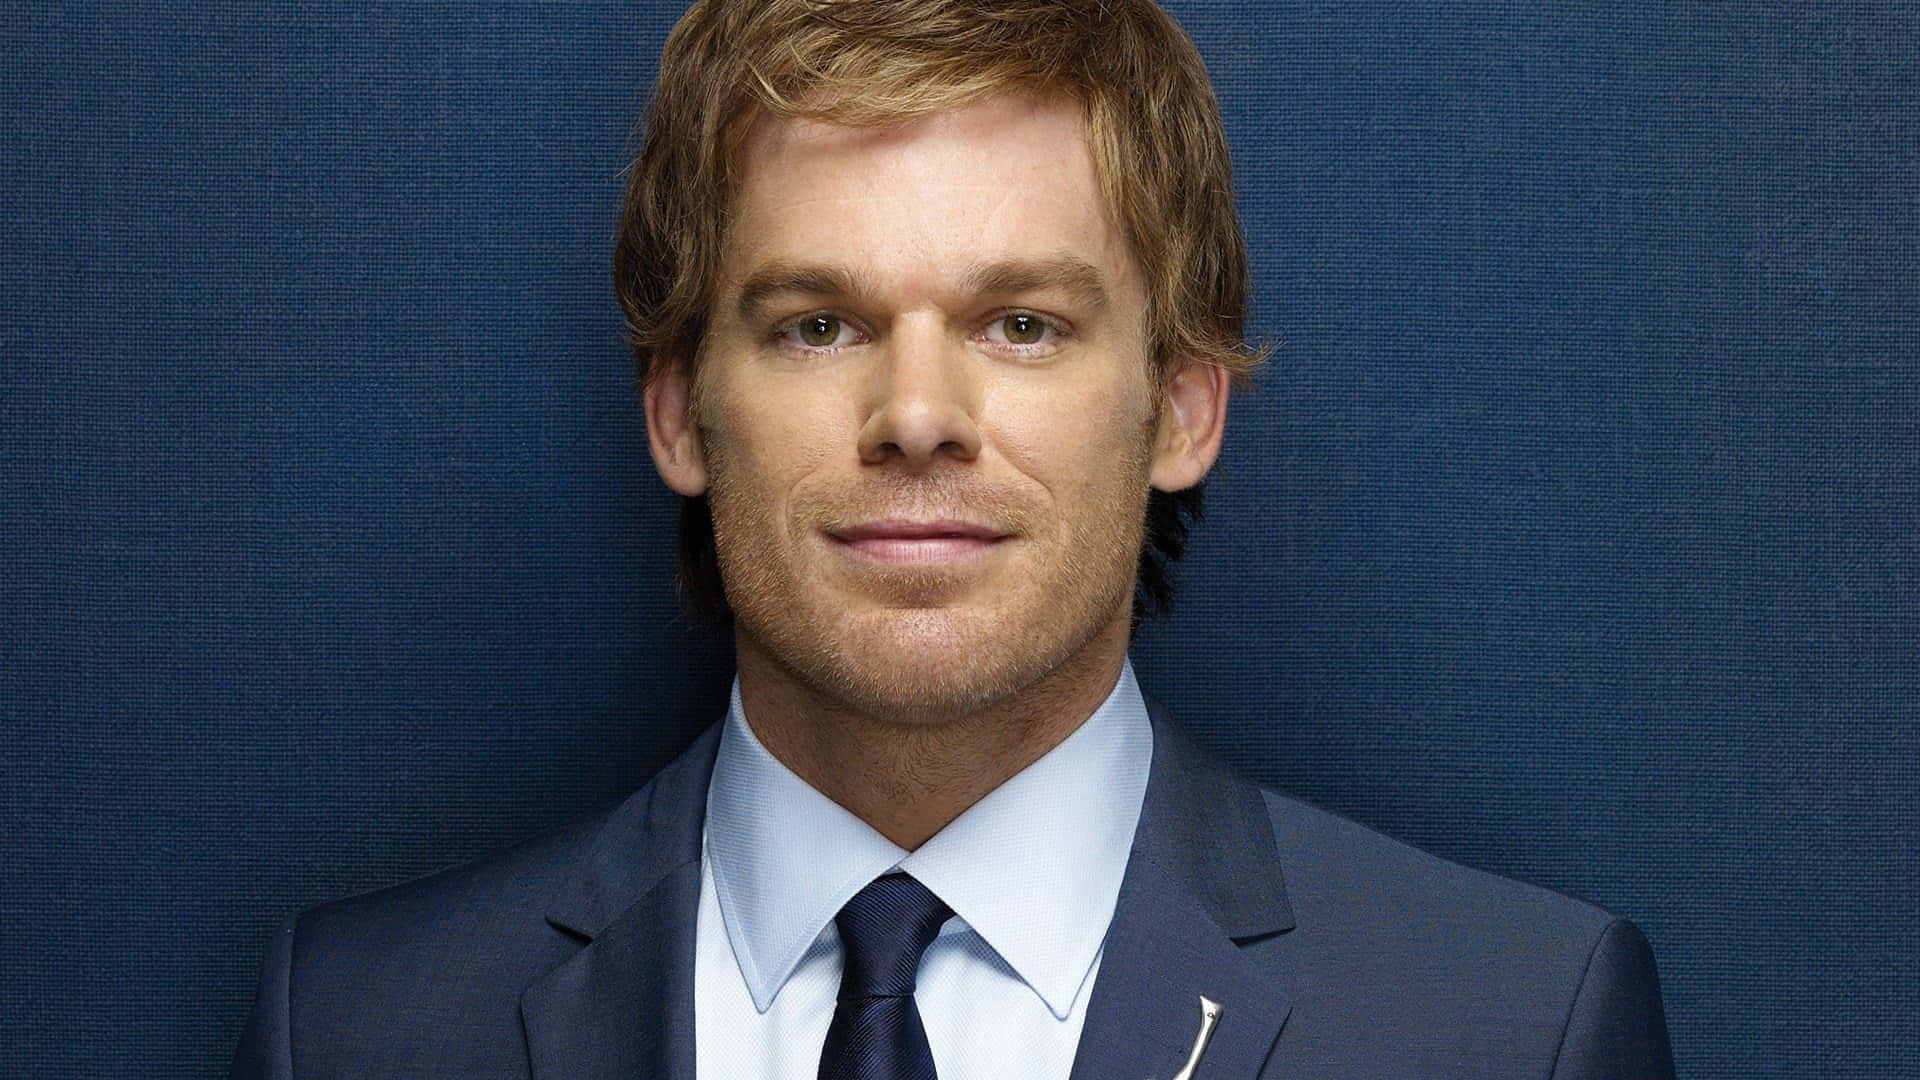 Actormichael C. Hall Would Be Translated To Spanish As 